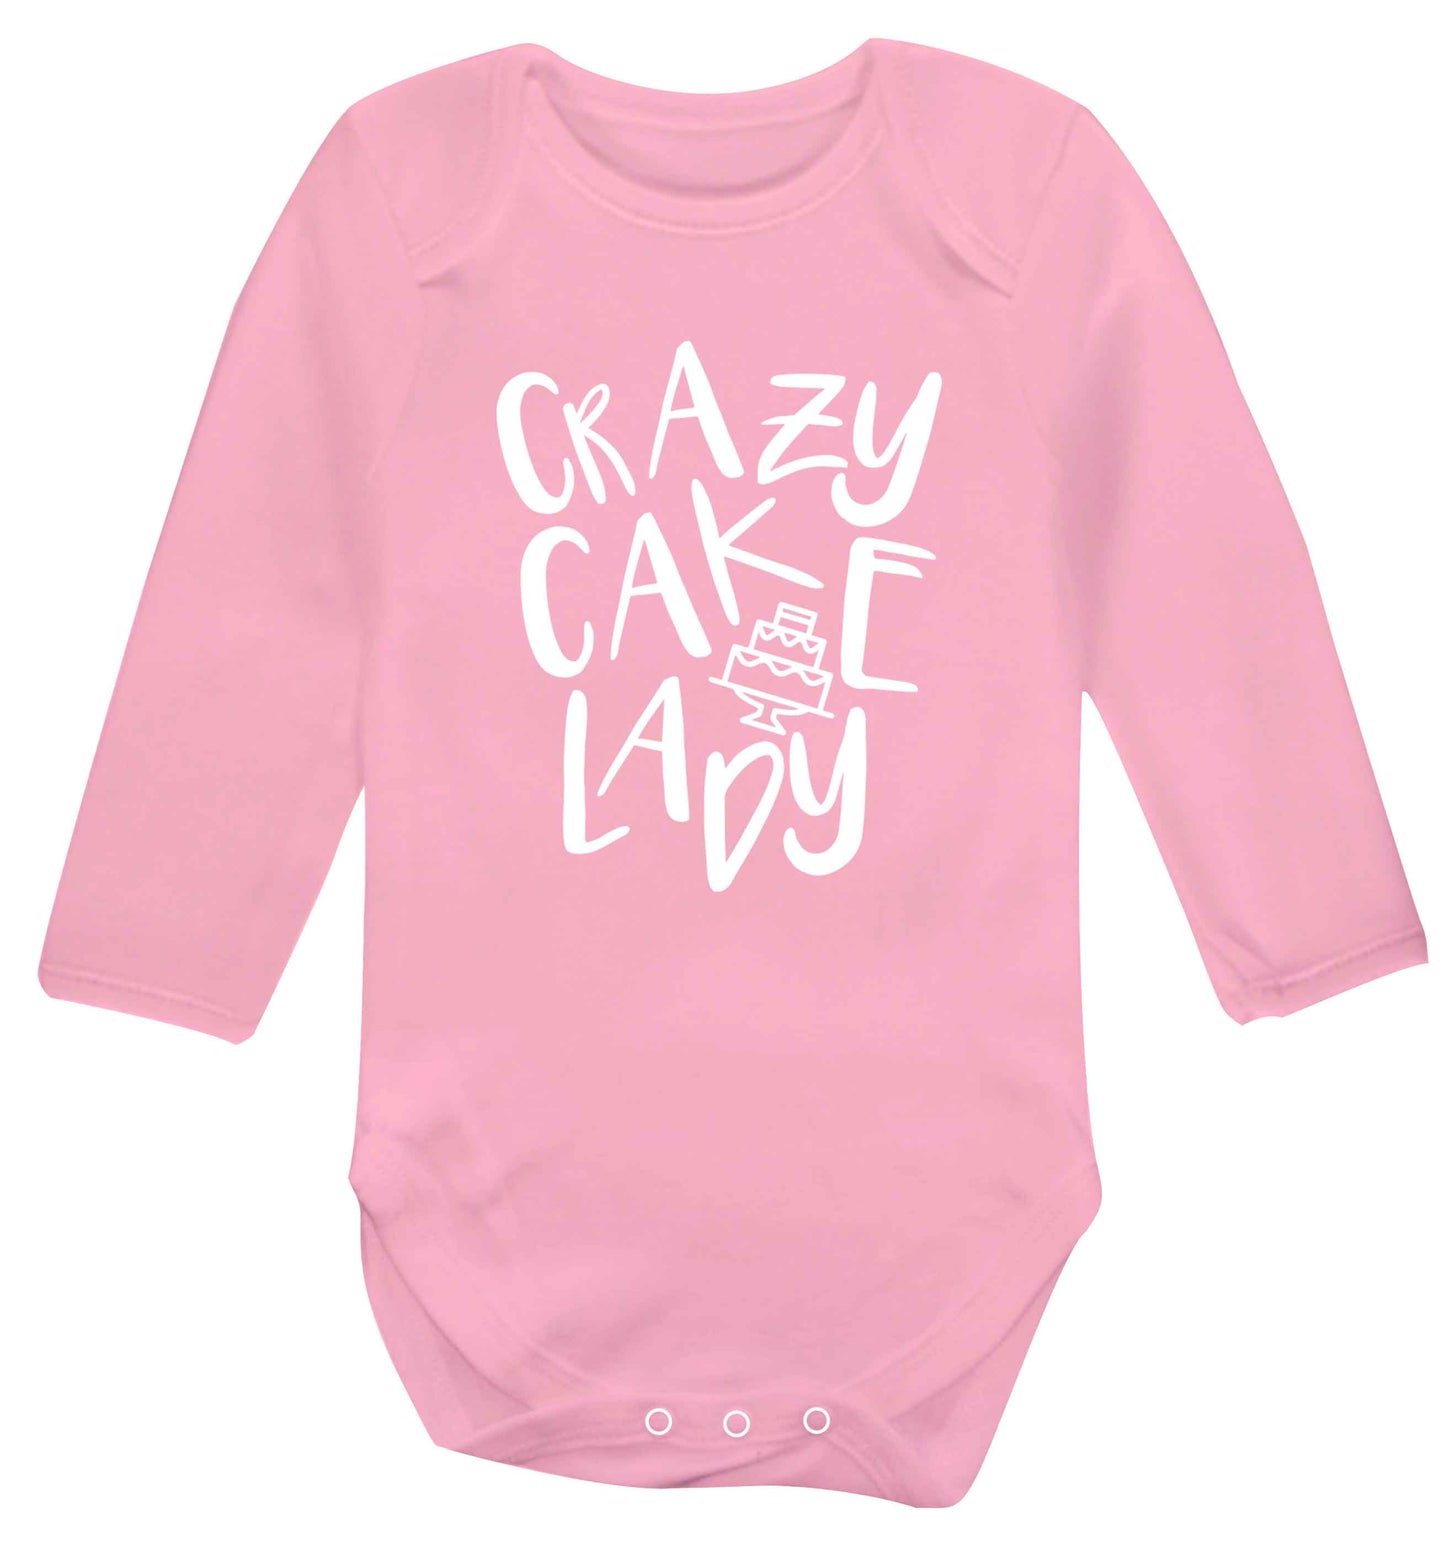 Crazy cake lady Baby Vest long sleeved pale pink 6-12 months